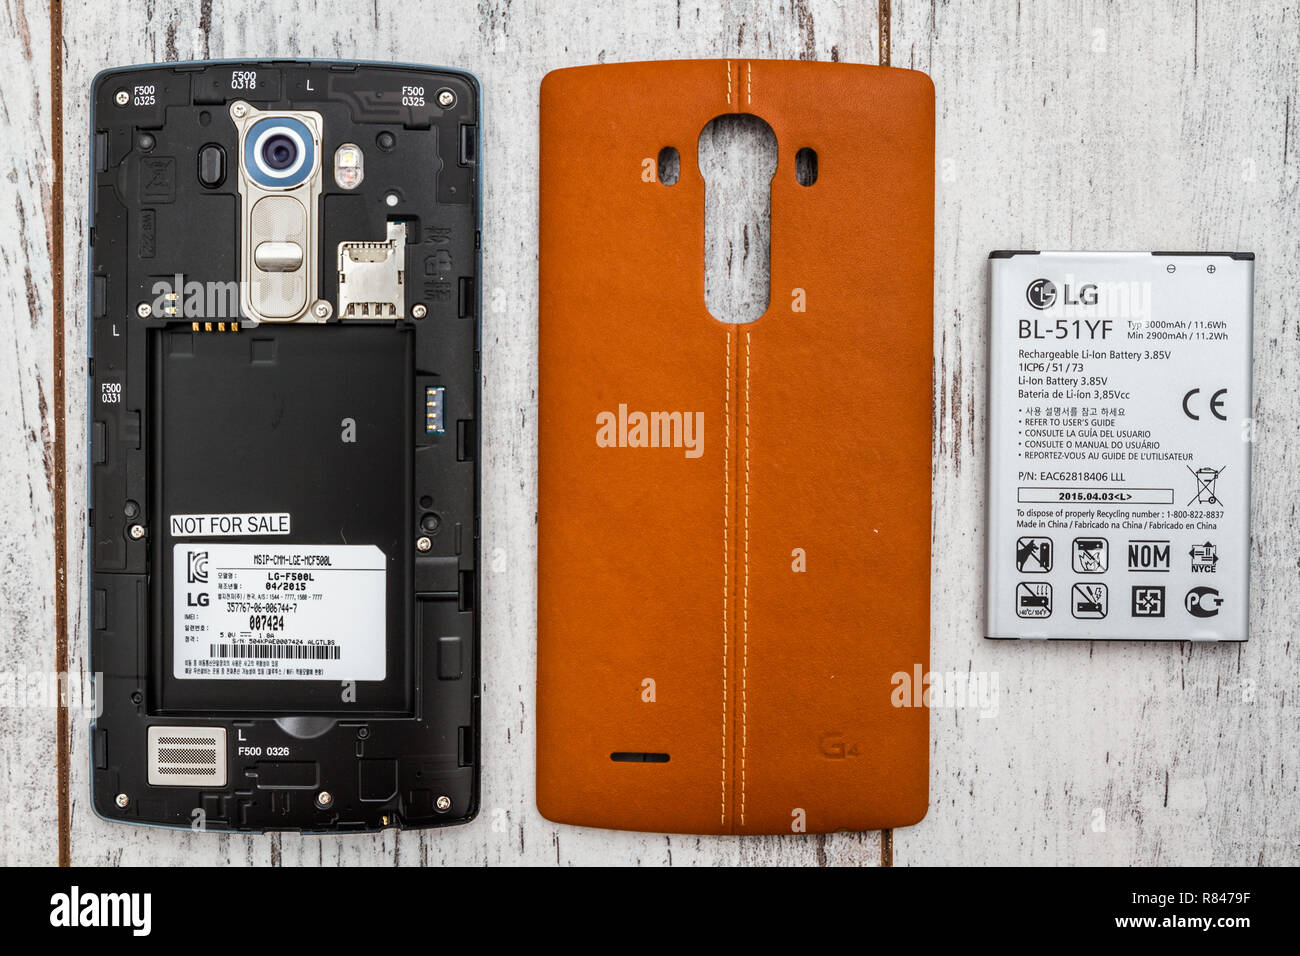 ESKISEHIR, TURKEY - MAY 31, 2015:  Rear view of LG G4 with a protective back cover open Stock Photo